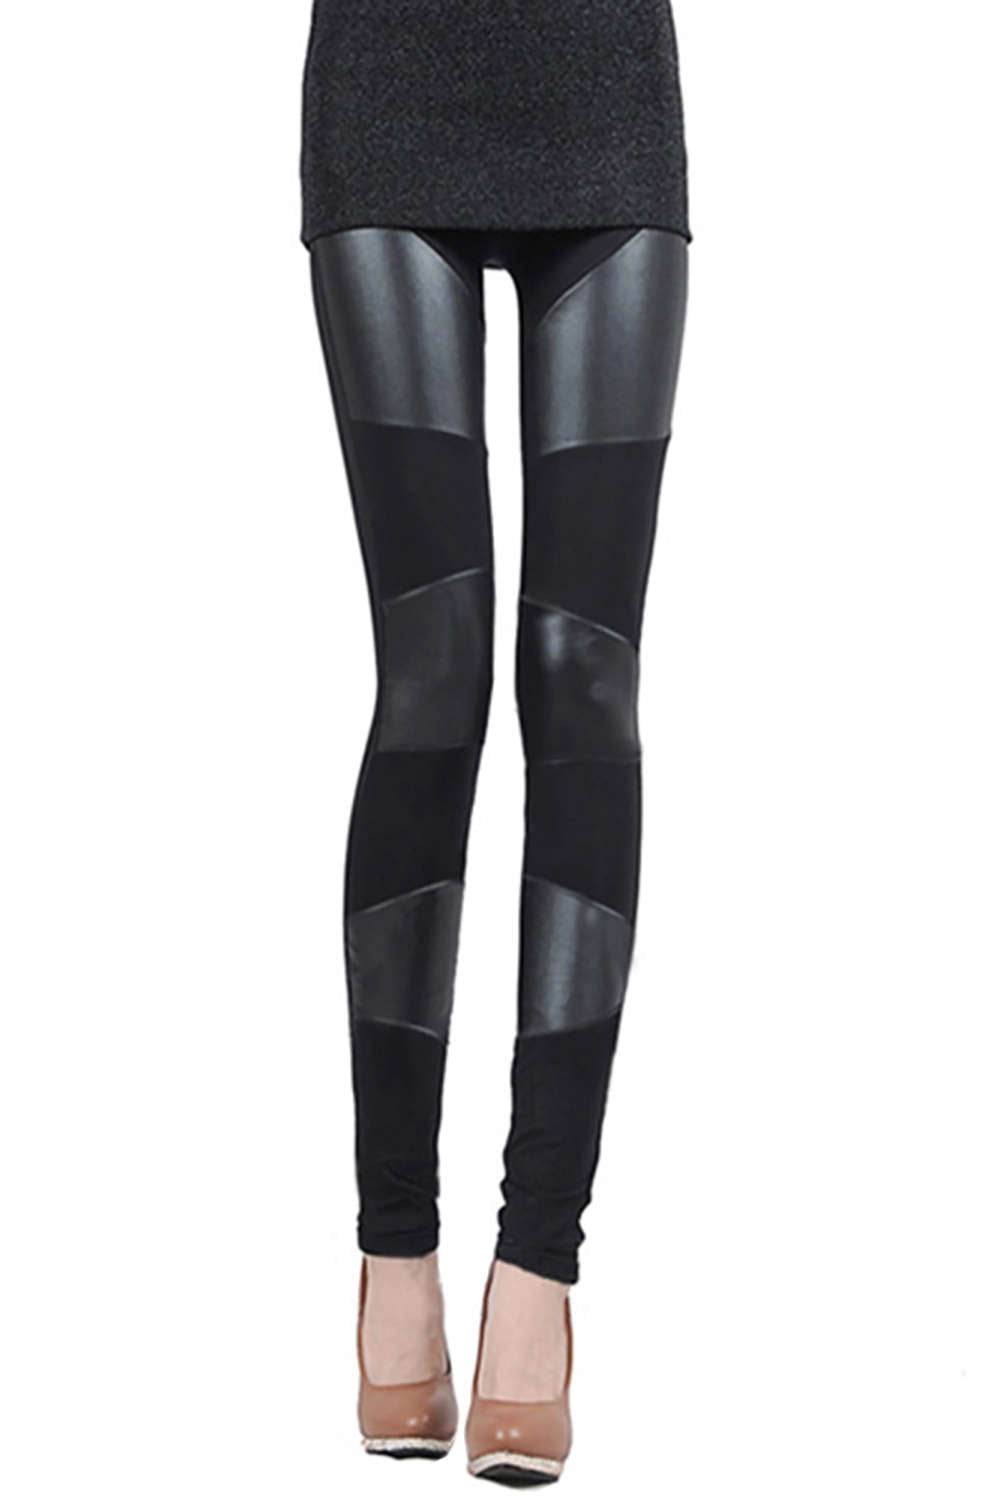 Iyasson Sexy Fashion Women Stitching Stretchy Faux Leather Tight Leggings Pants